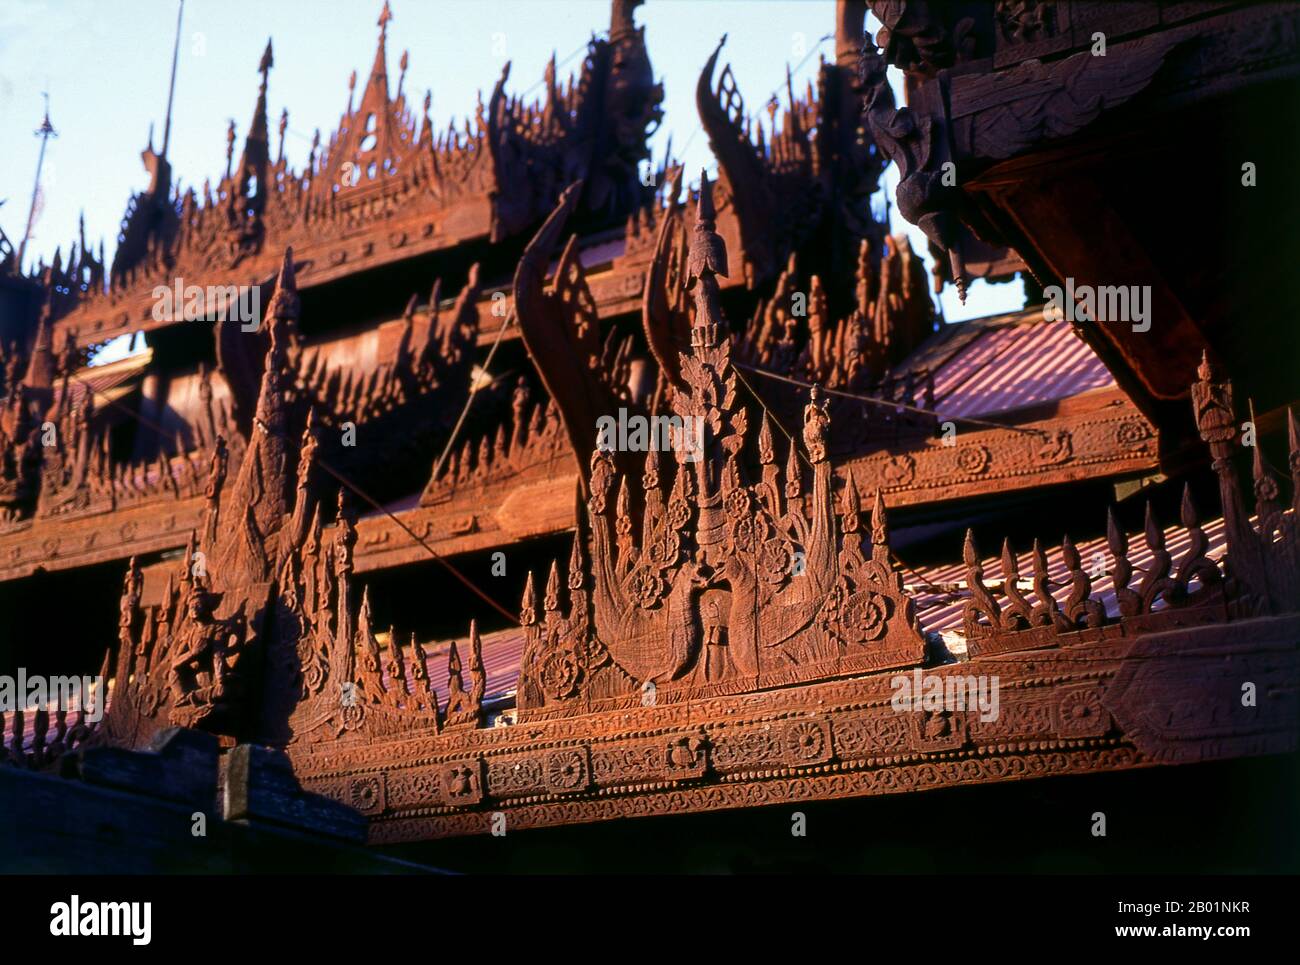 Burma/Myanmar: Roof detail, Shwe In Bin Kyaung, Mandalay.  Mandalay, a sprawling city of more than 1 million people, was founded in 1857 by King Mindon to coincide with an ancient Buddhist prophecy. It was believed that Gautama Buddha visited the sacred mount of Mandalay Hill with his disciple Ananda, and proclaimed that on the 2,400th anniversary of his death, a metropolis of Buddhist teaching would be founded at the foot of the hill. Stock Photo